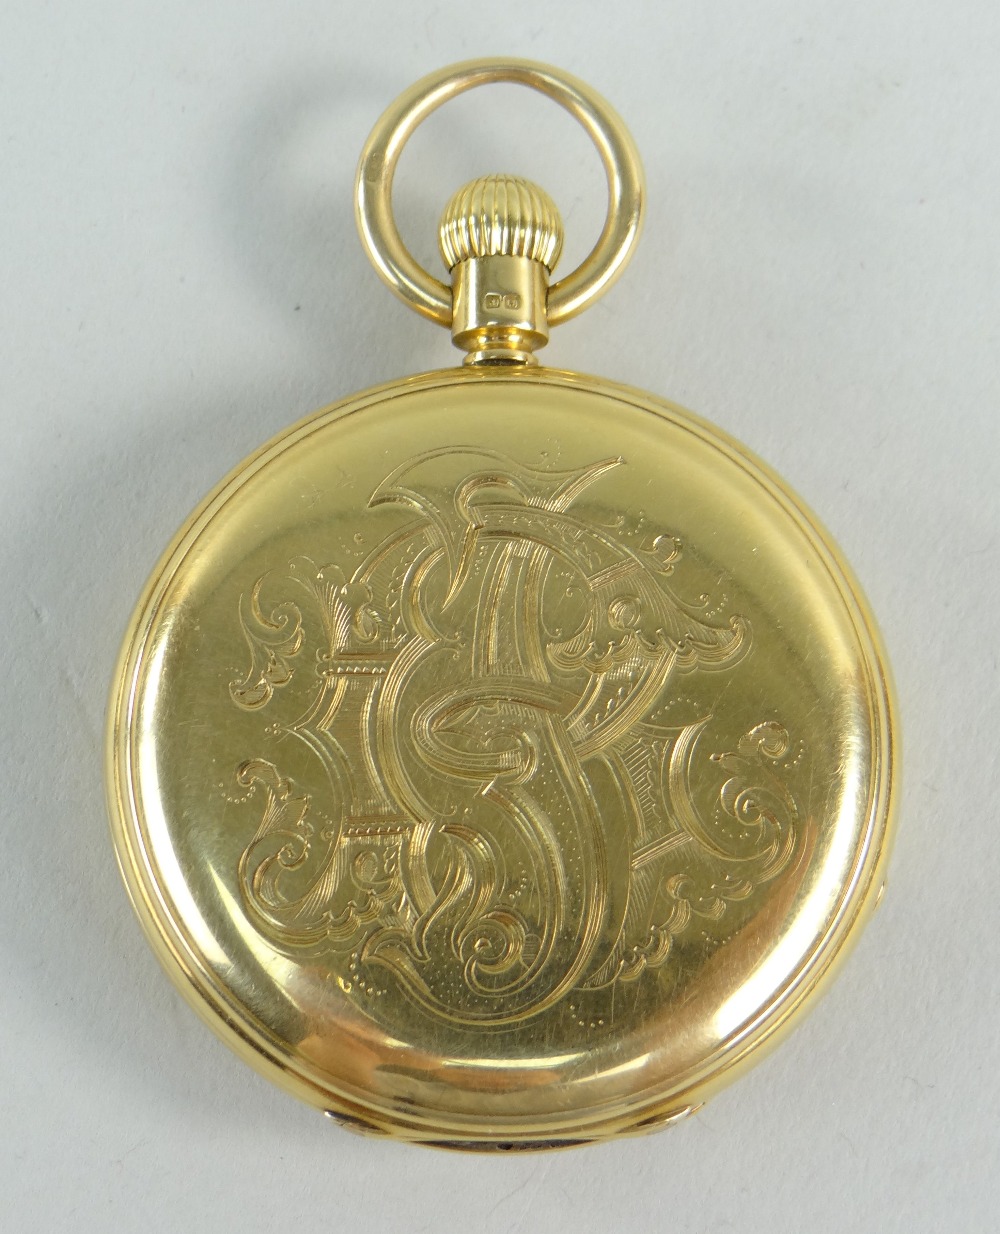 FINE VICTORIAN SHEFFIELD GOLDSMITHS CO. 18CT GOLD FULL HUNTER POCKET WATCH, by Victor Kullberg - Image 3 of 5